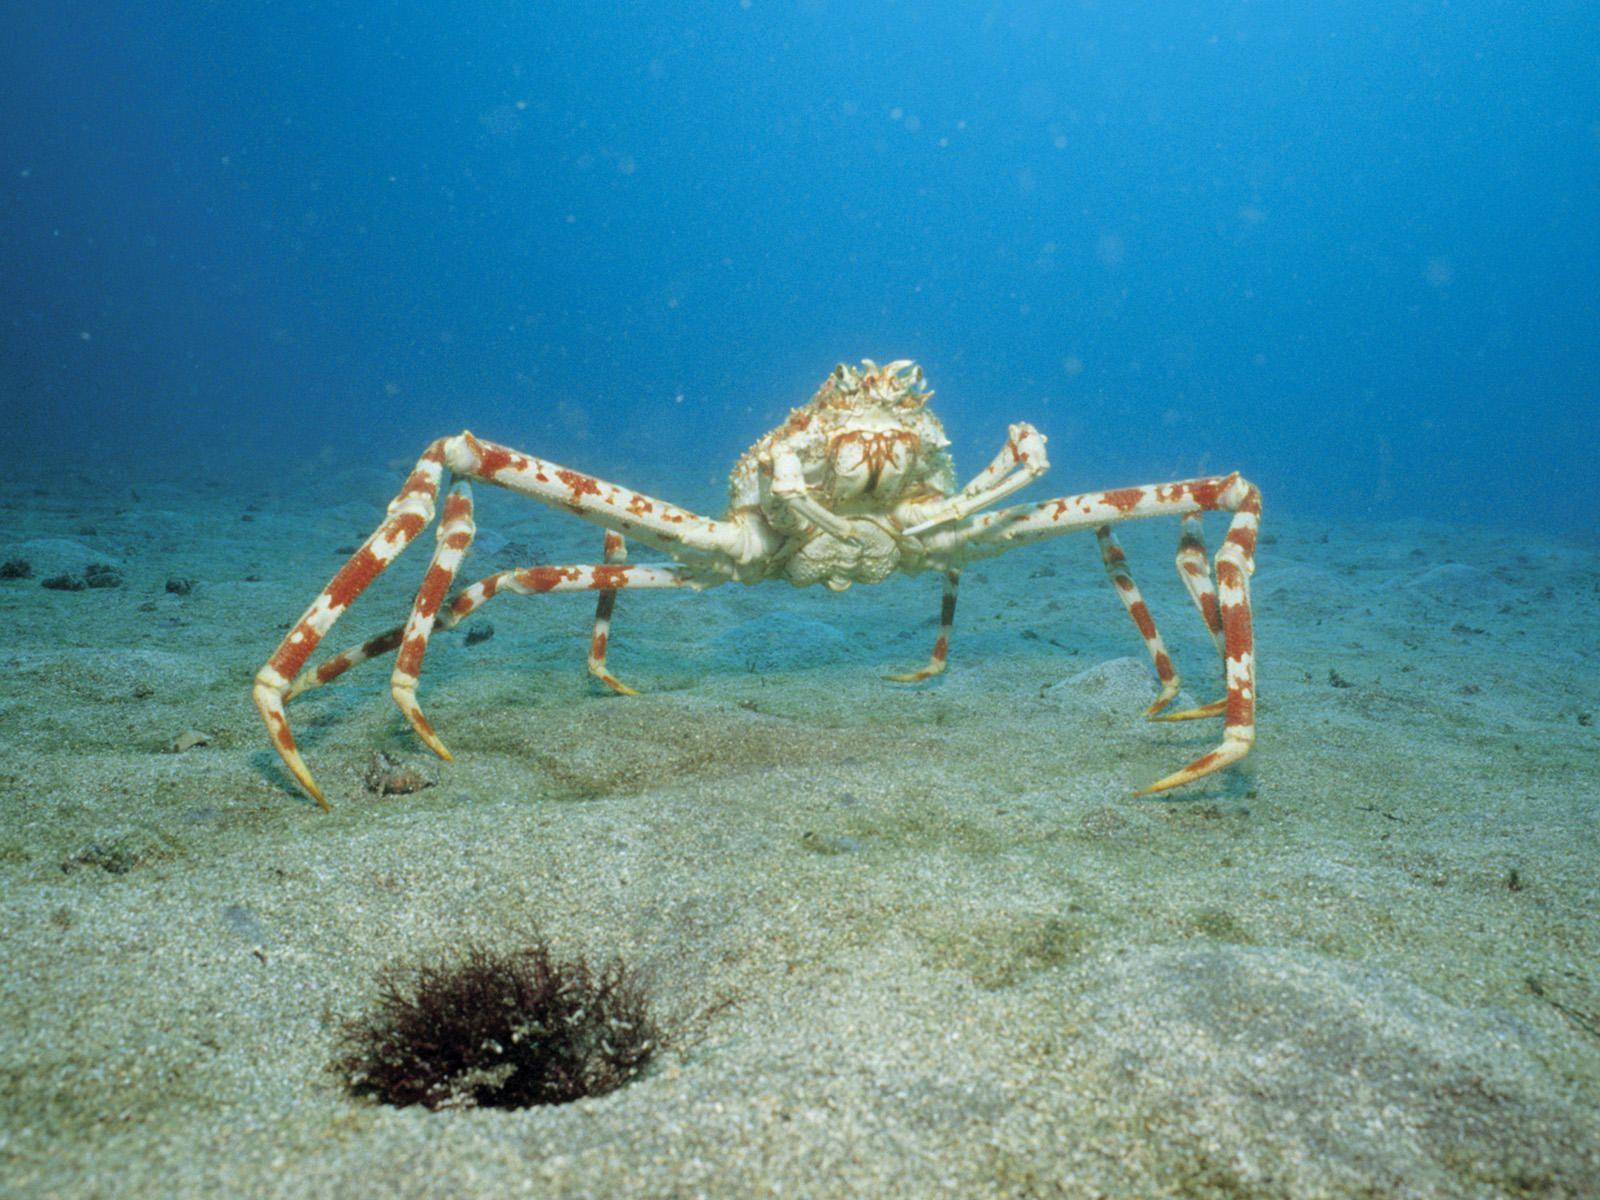 Japanese Spider Crab legs, which are the largest known crabs, can